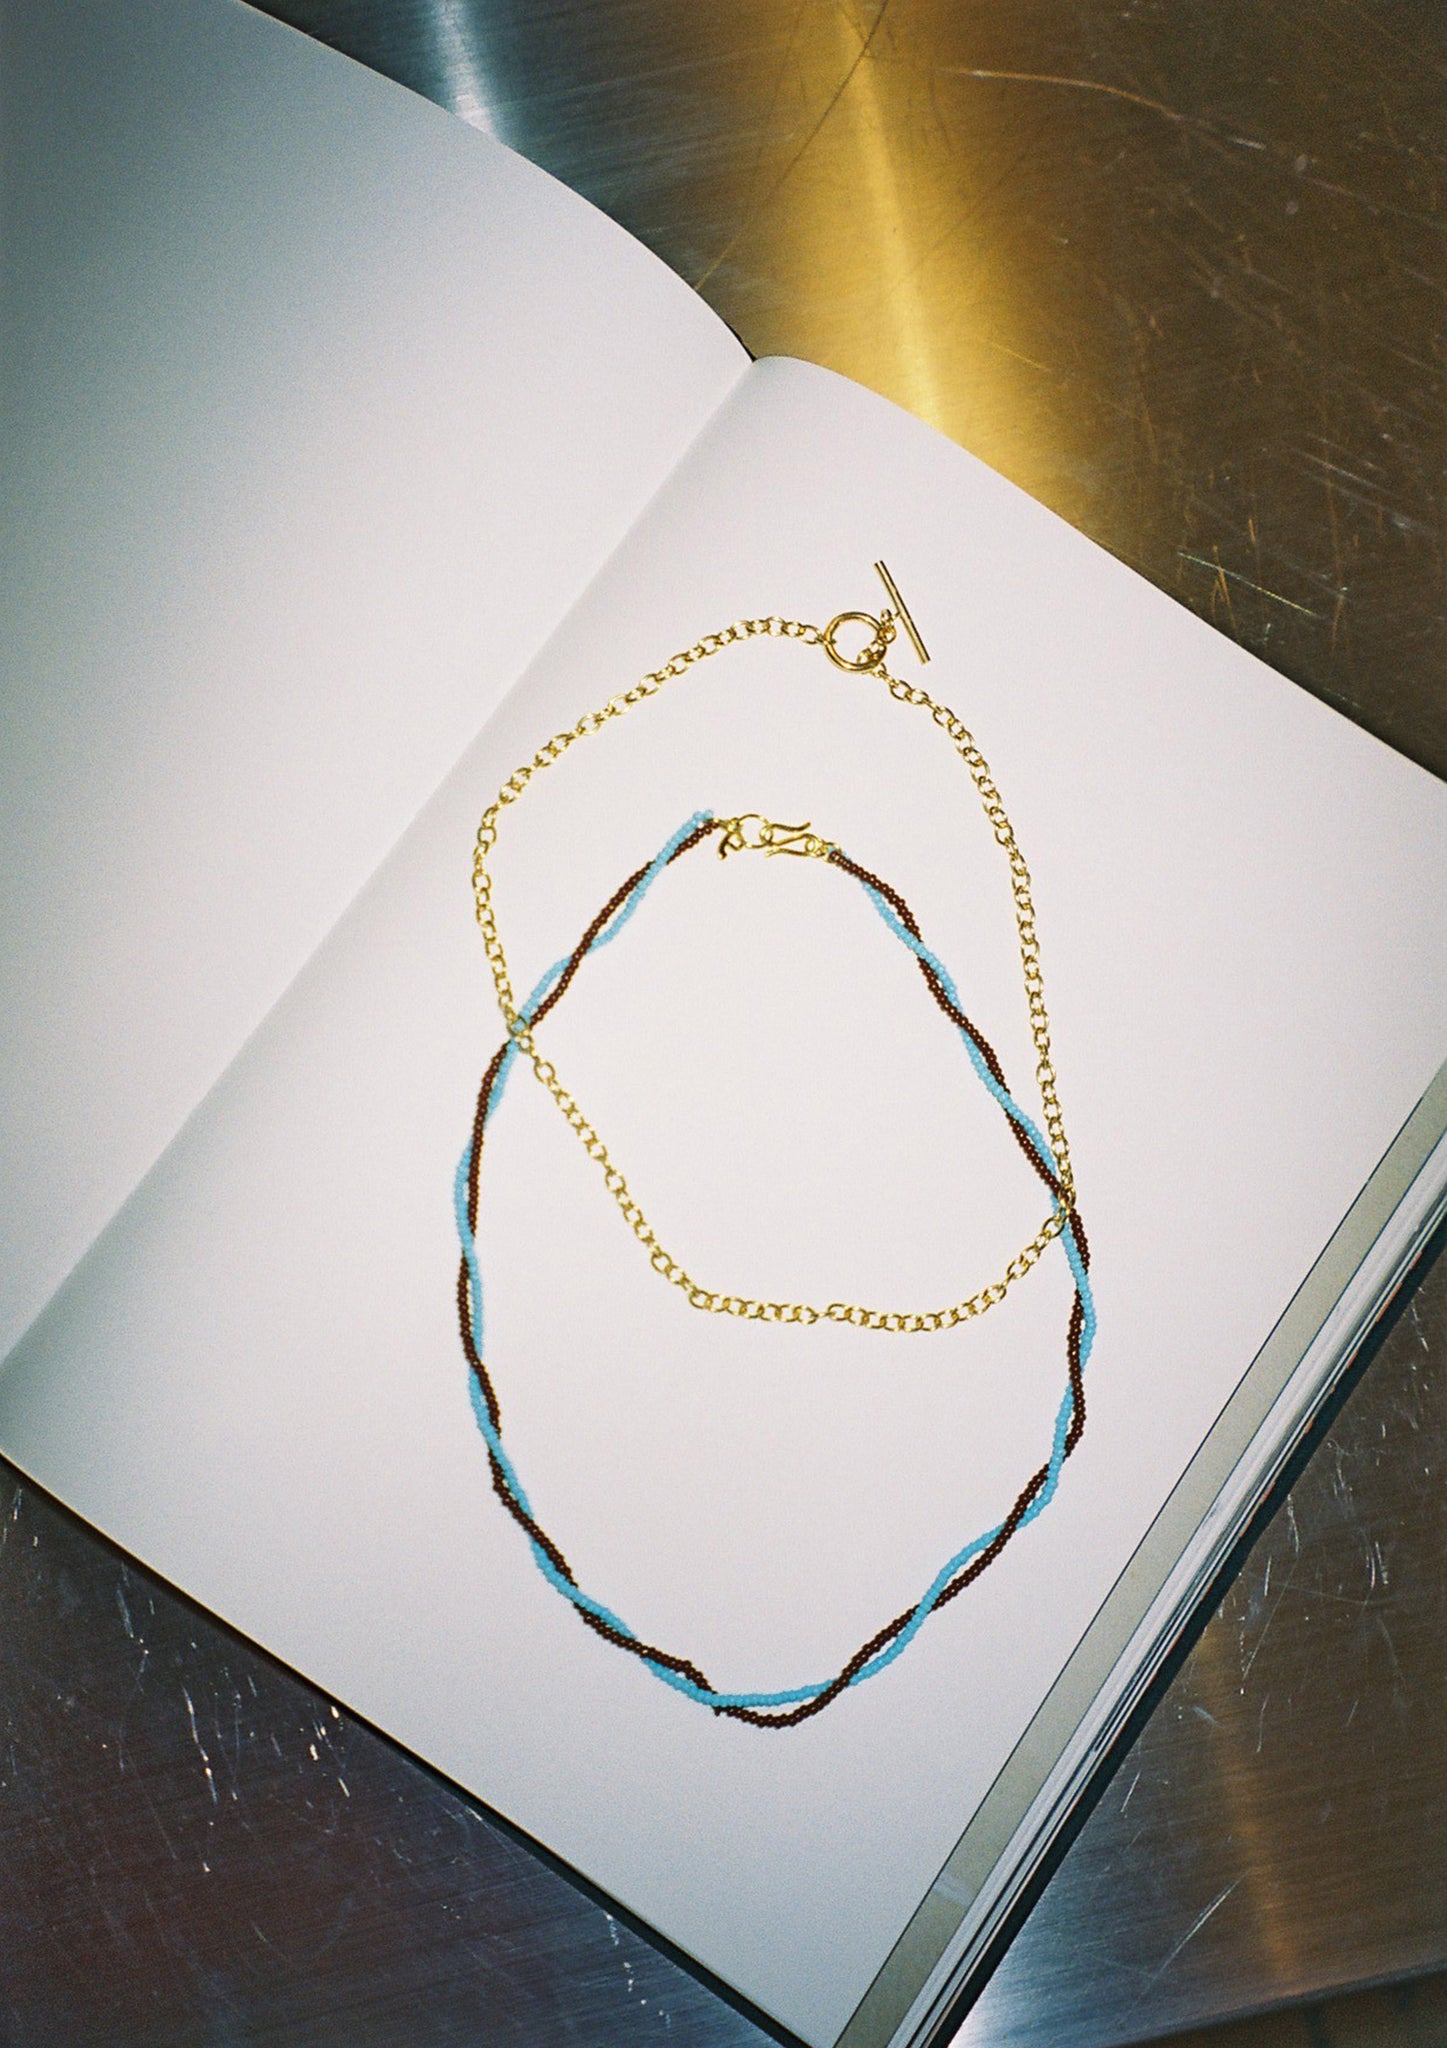 Twister Blue Brown Necklace